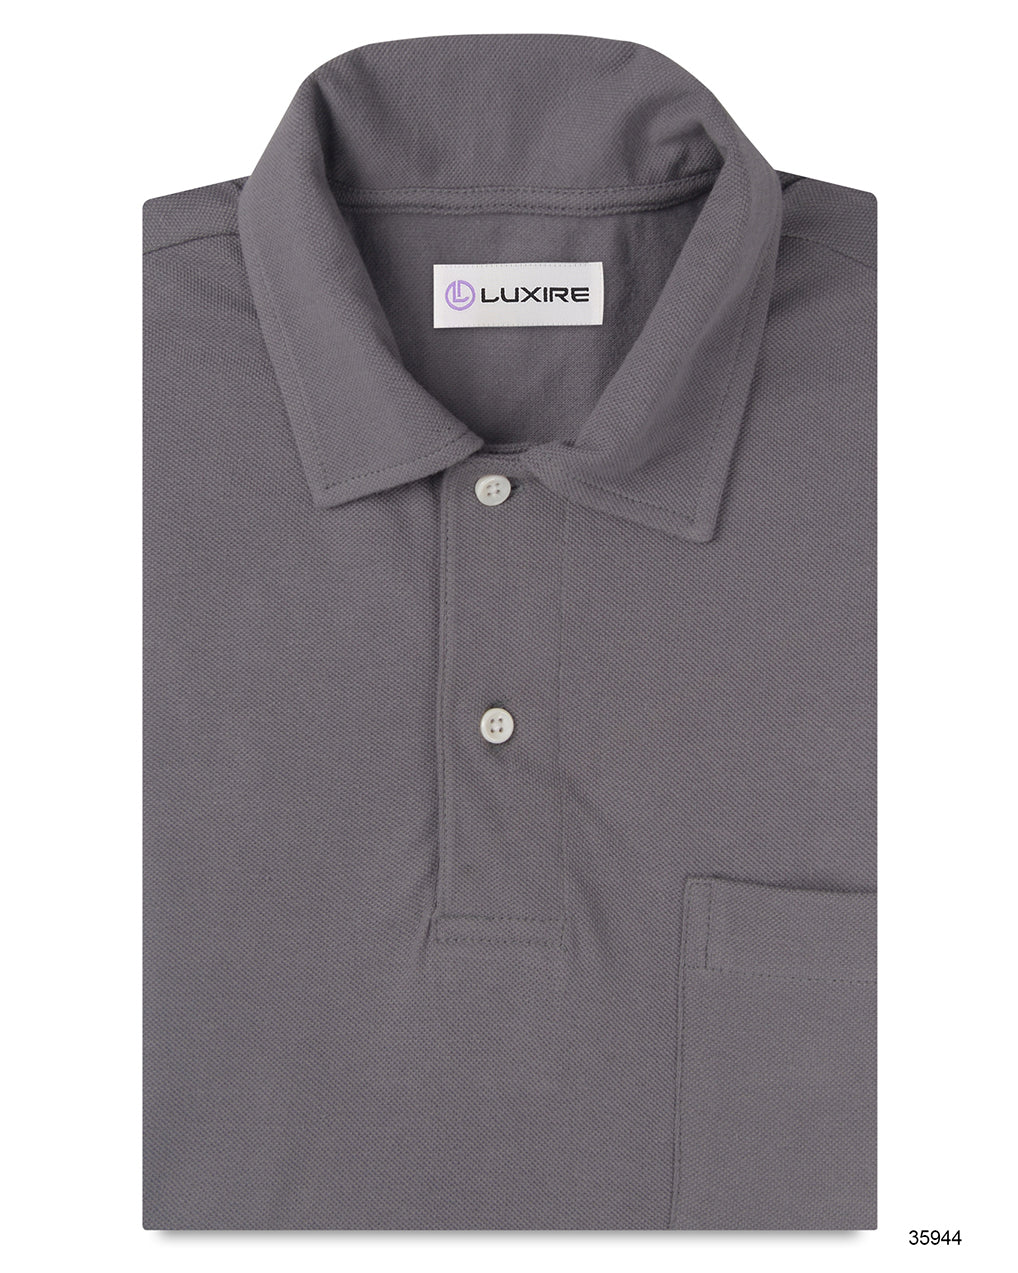 Front of the custom oxford polo shirt for men by Luxire in flint grey